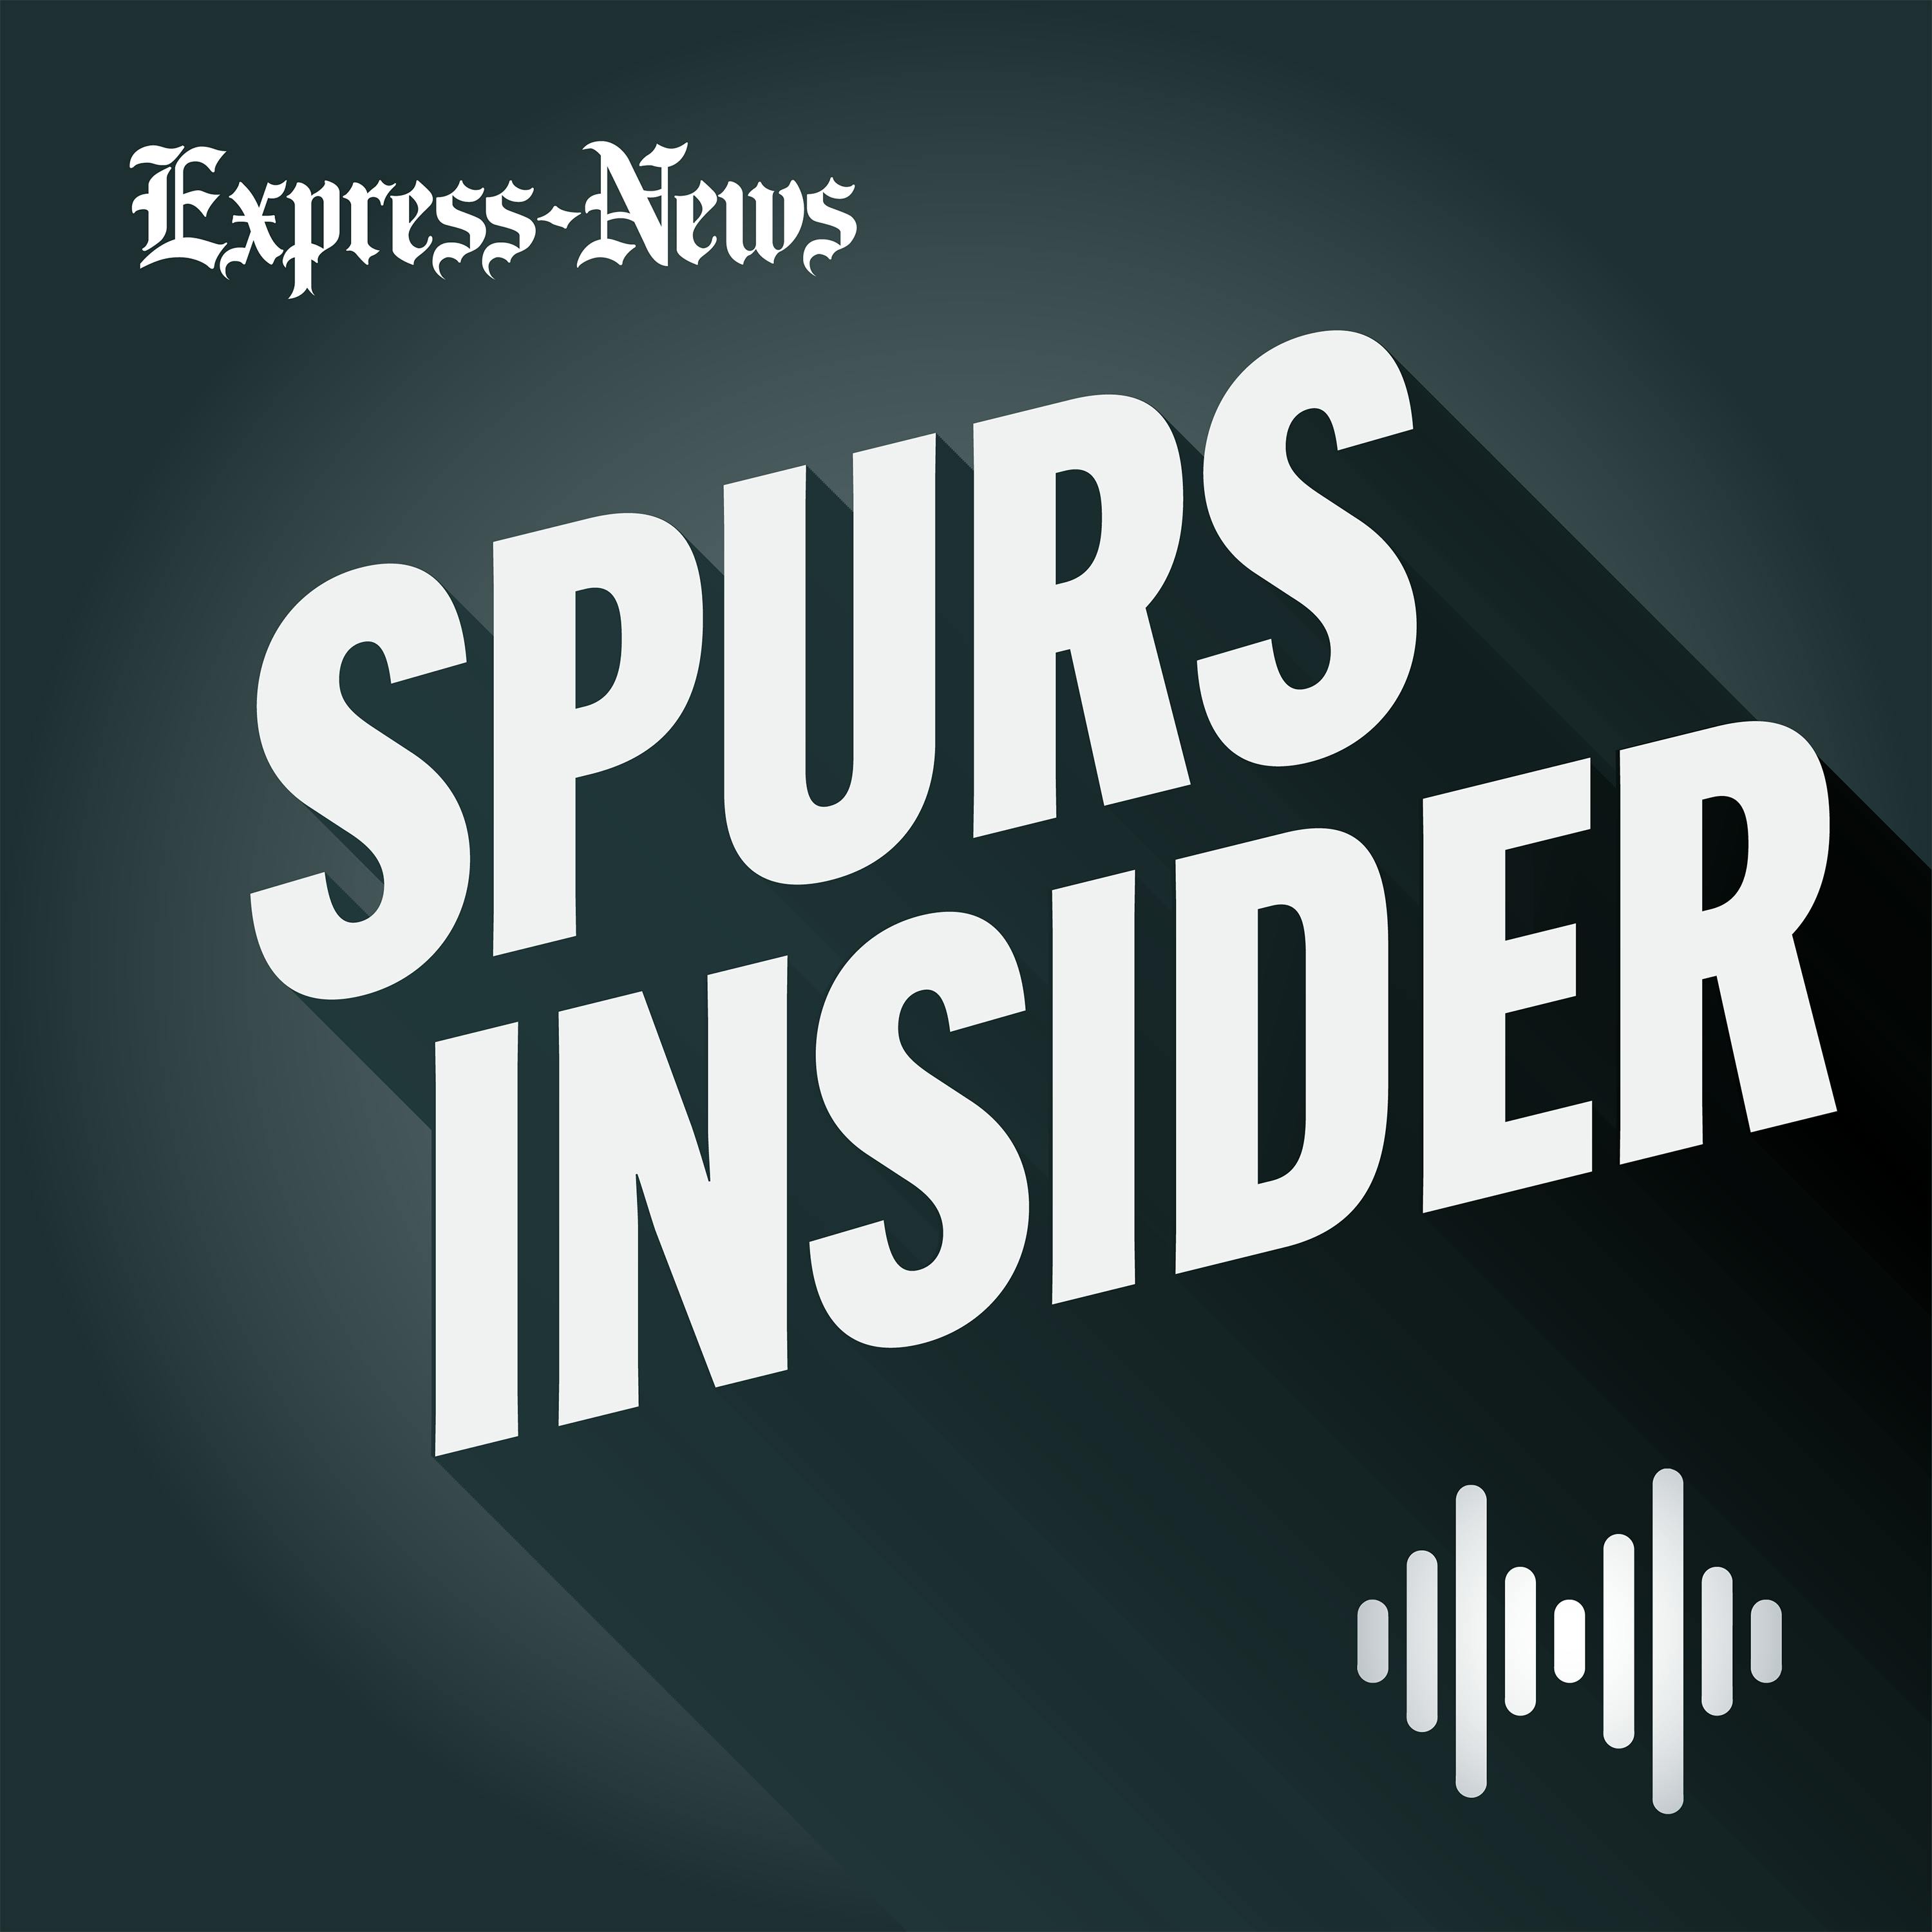 Episode 102: Will the Spurs survive the season and make the playsoff?